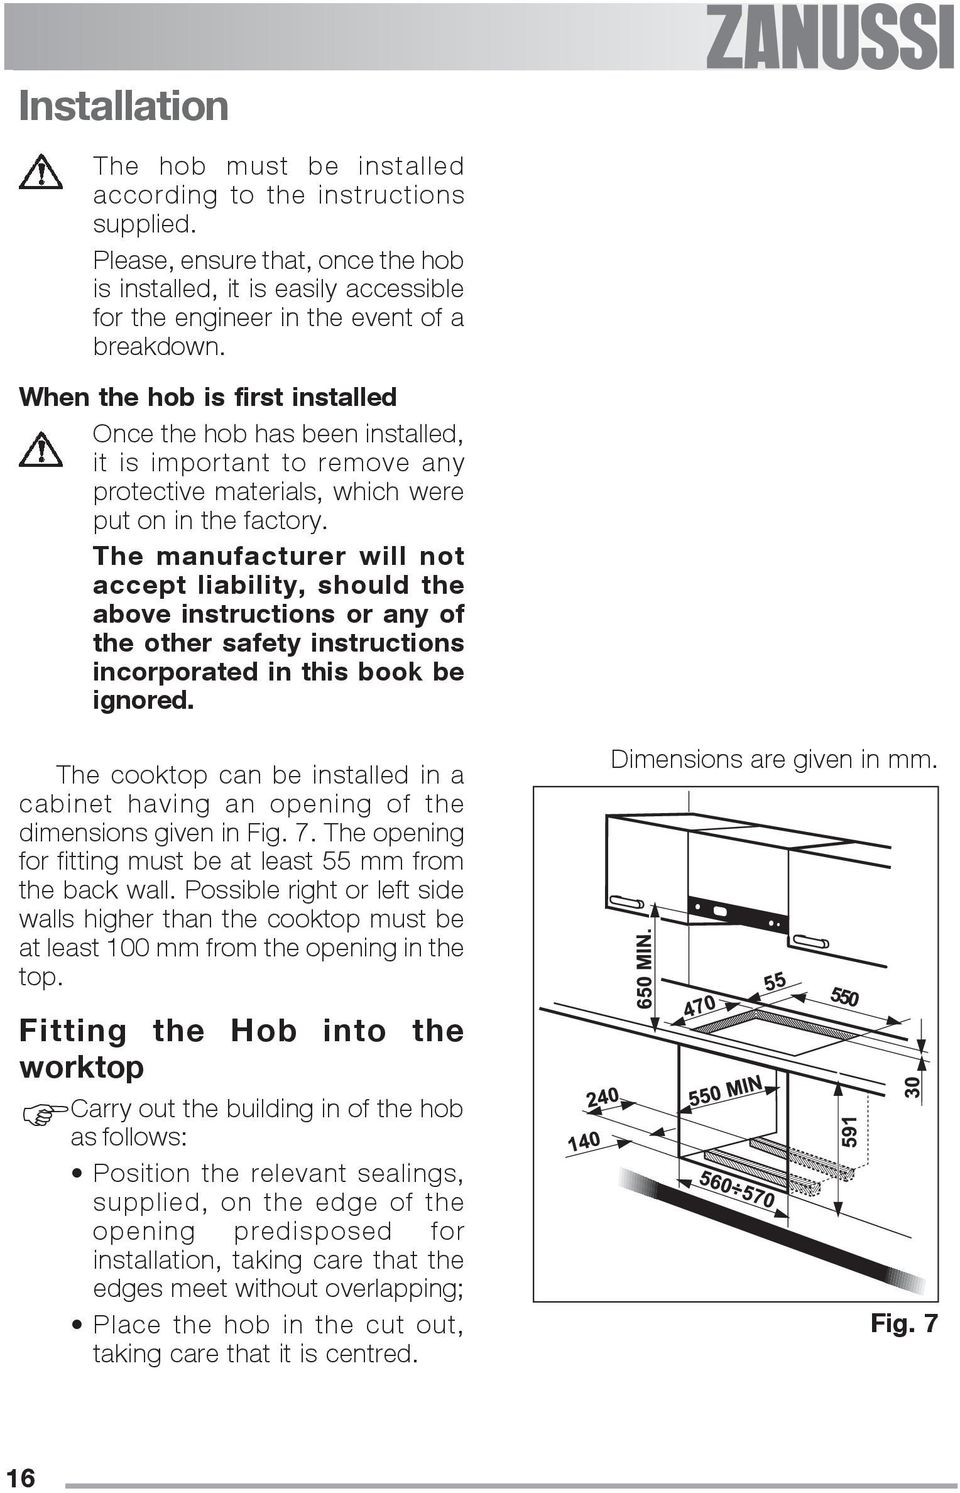 The manufacturer will not accept liability, should the above instructions or any of the other safety instructions incorporated in this book be ignored.